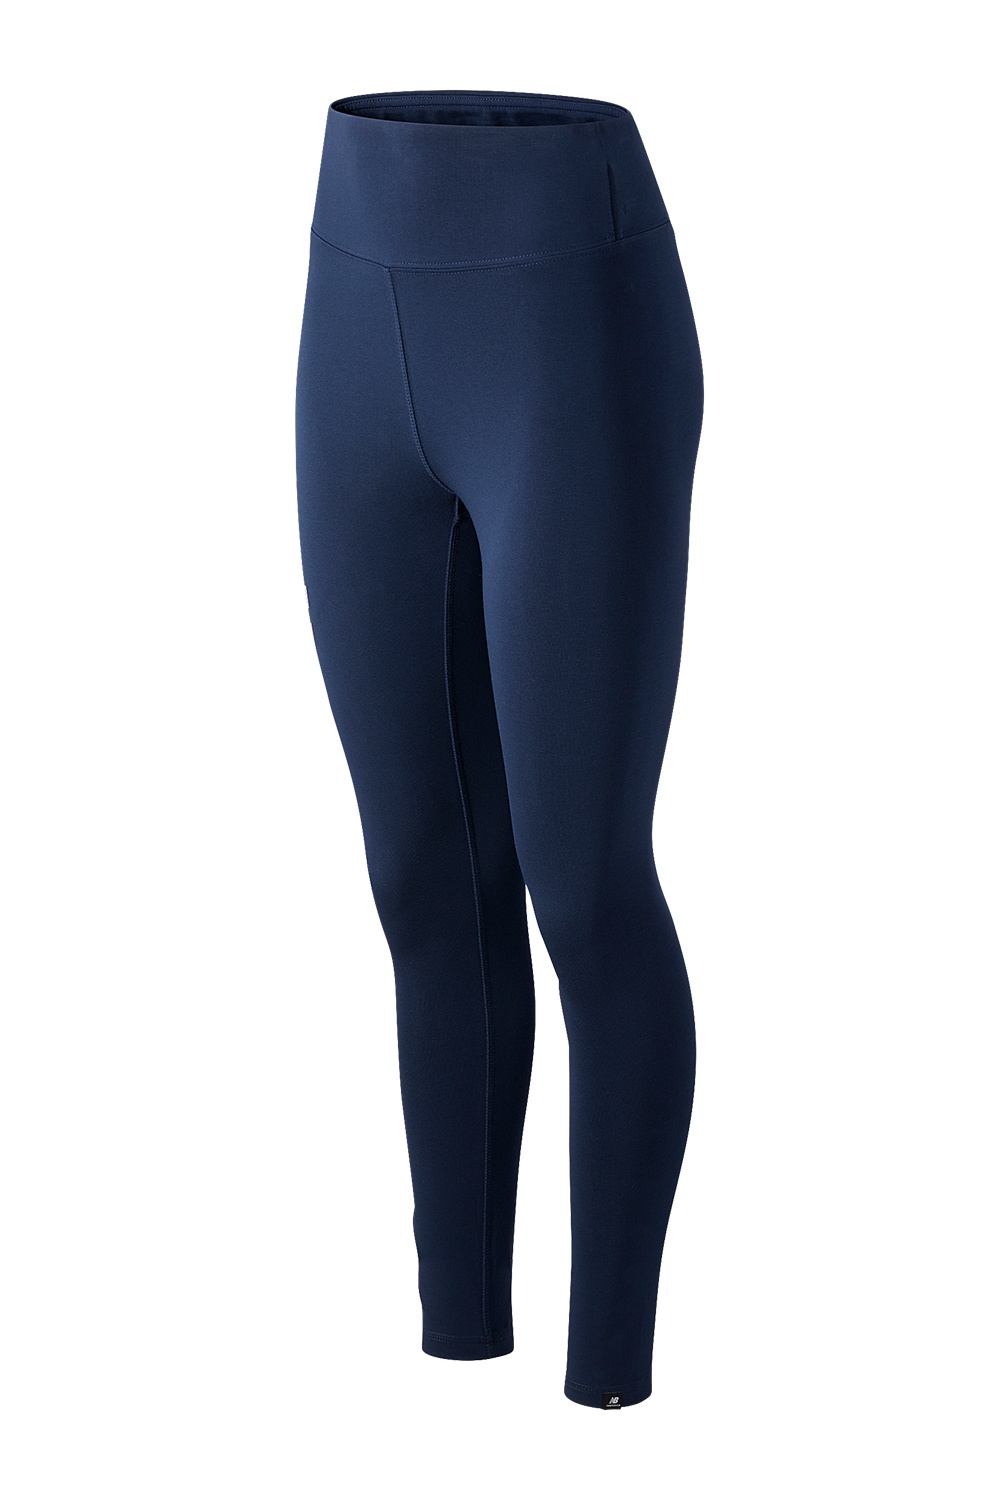 New Balance Solid Color Women's Lifestyle Tight